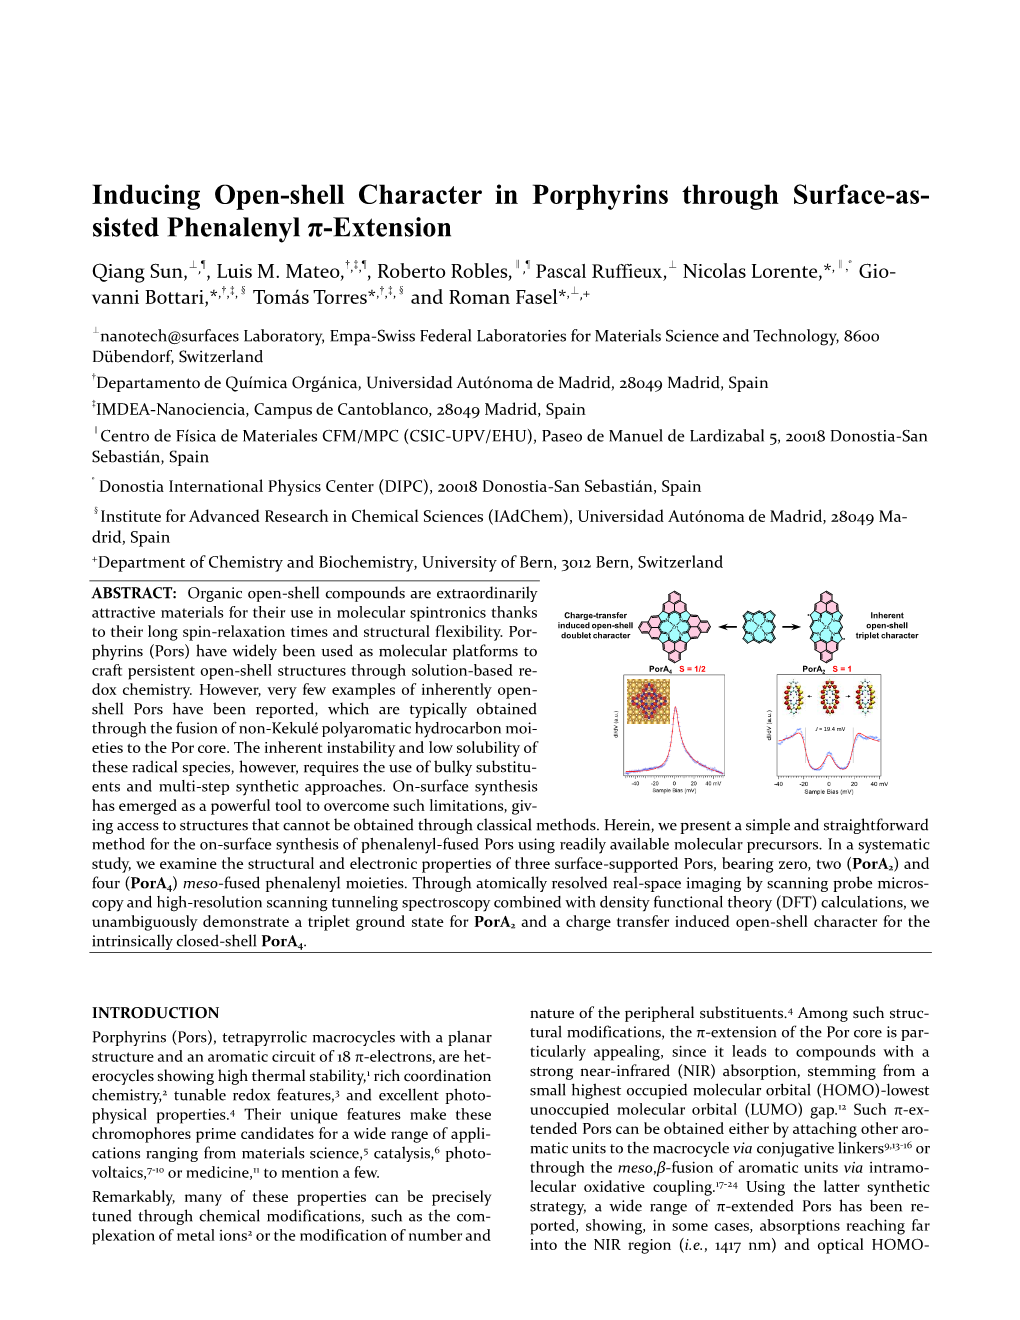 Inducing Open-Shell Character in Porphyrins Through Surface-As- Sisted Phenalenyl Π-Extension